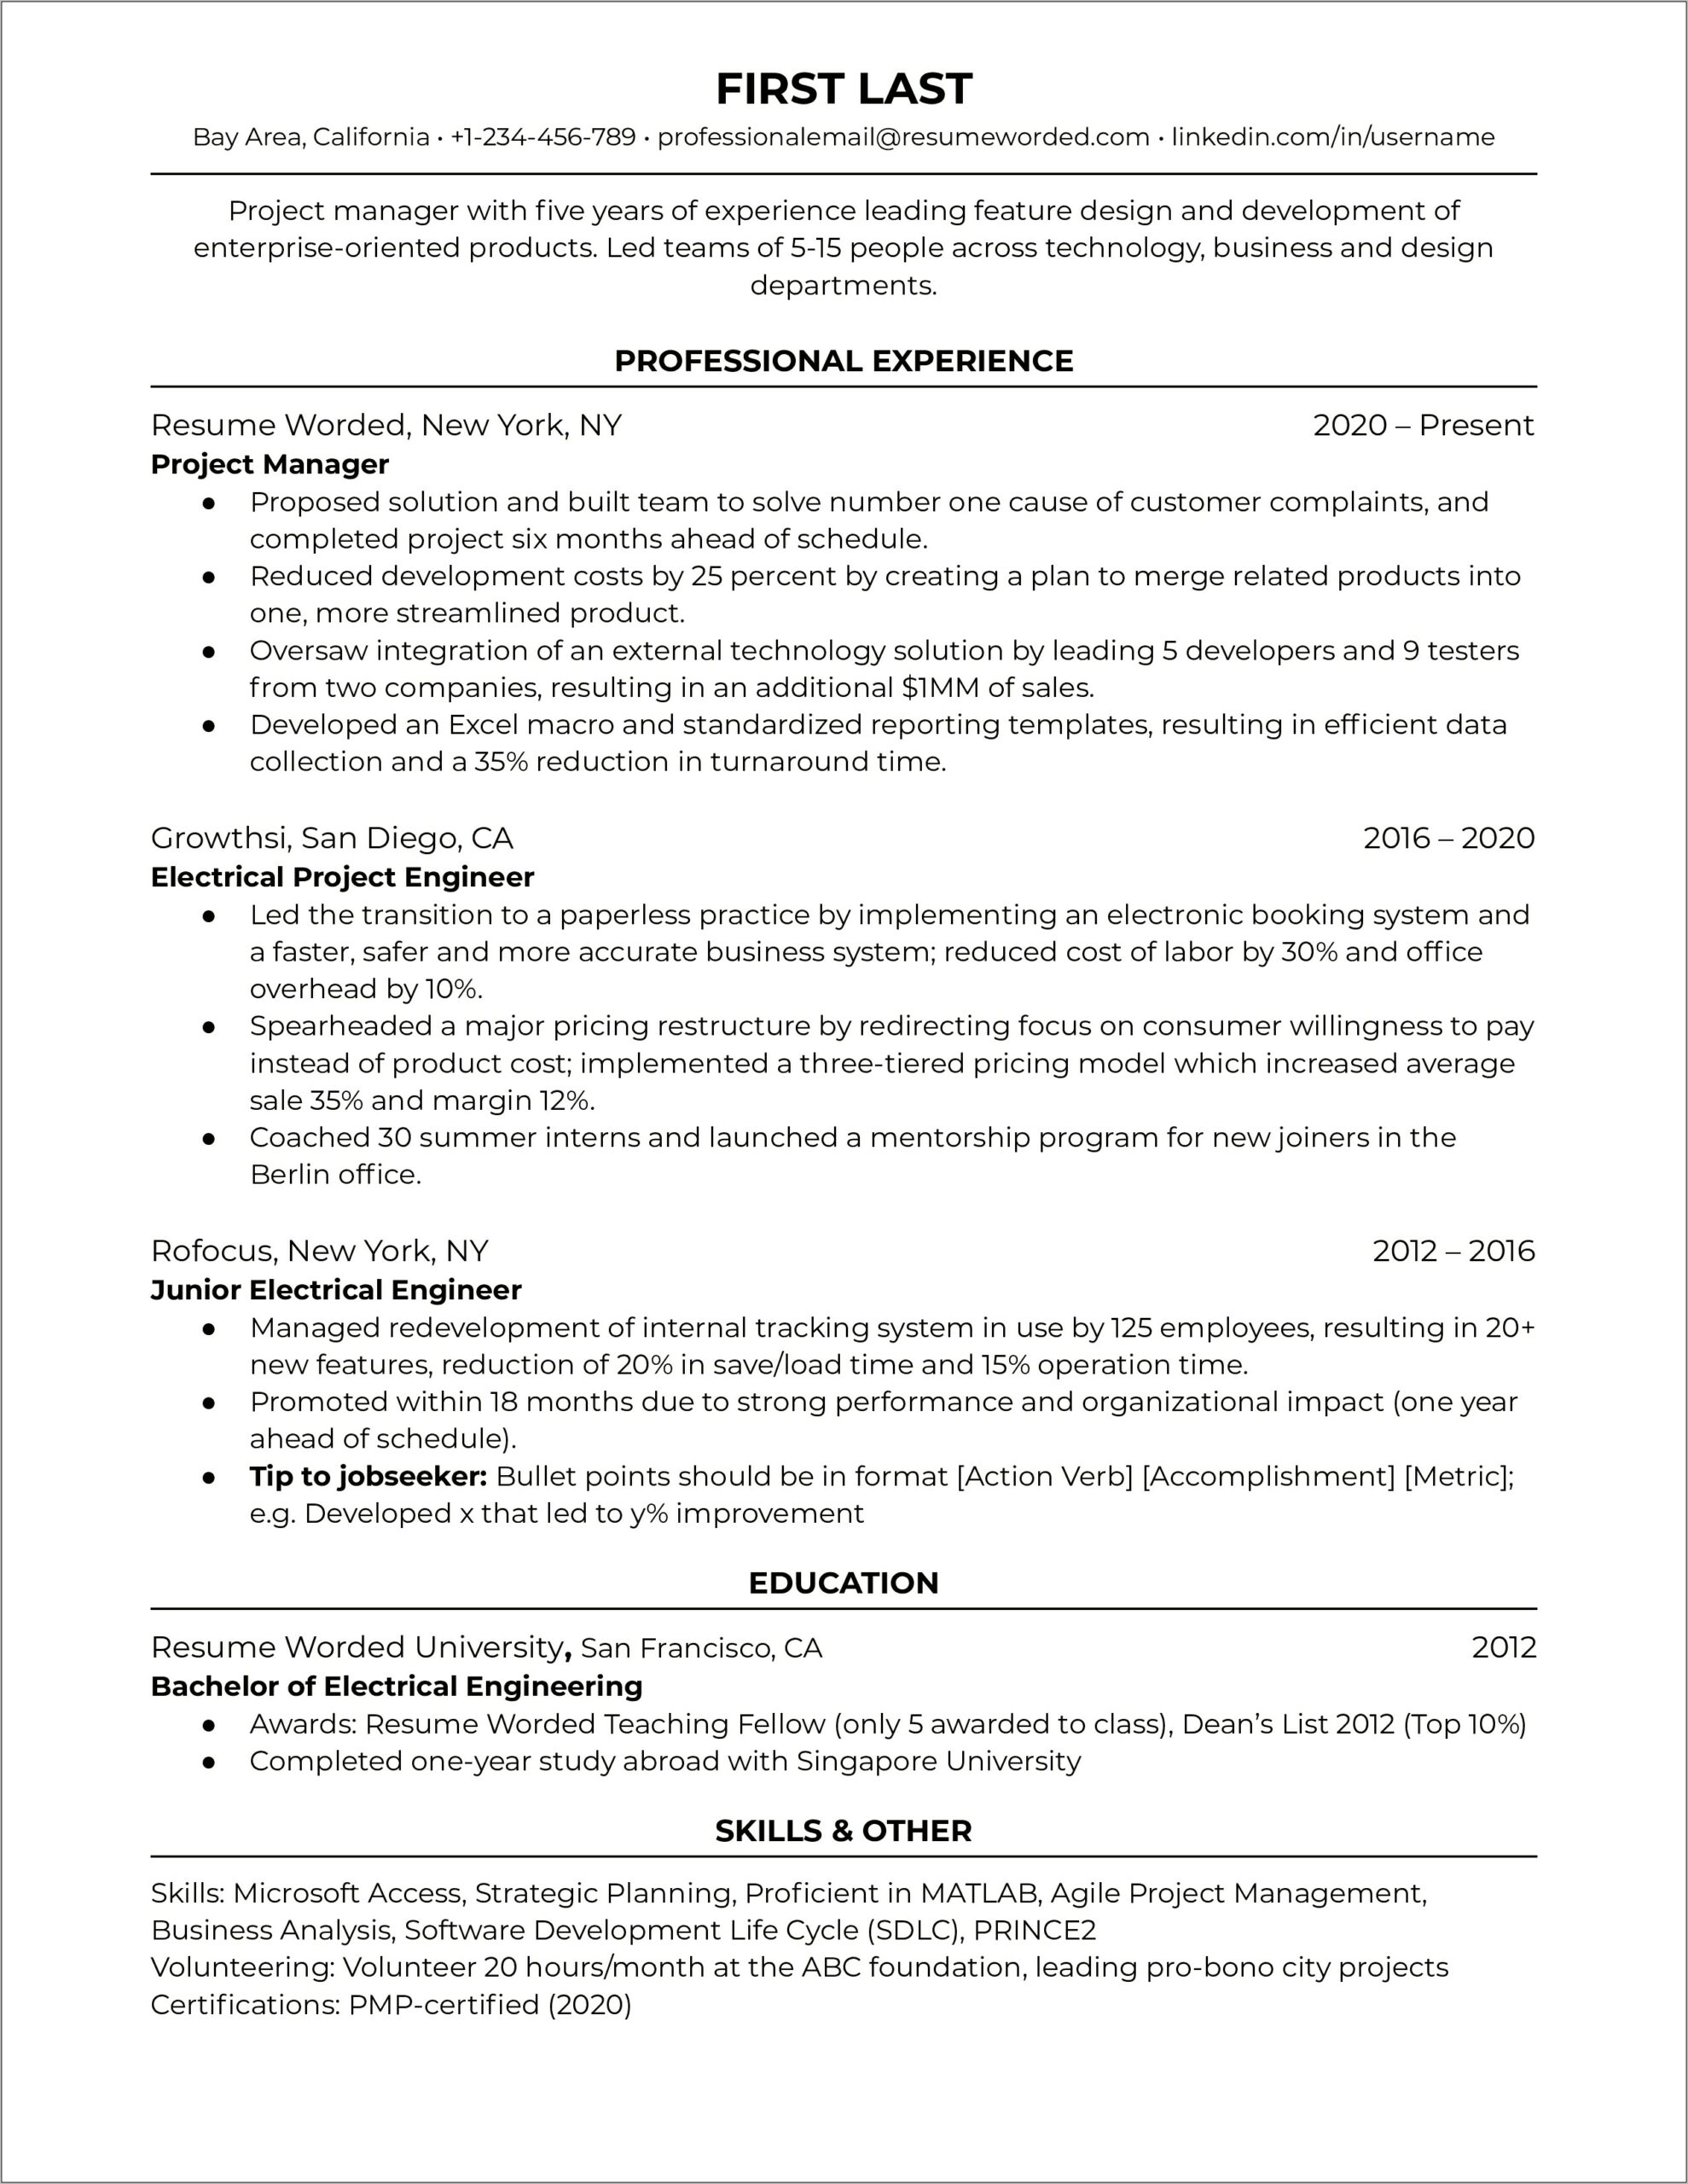 Construction Manager Resume Areas Of Expertise